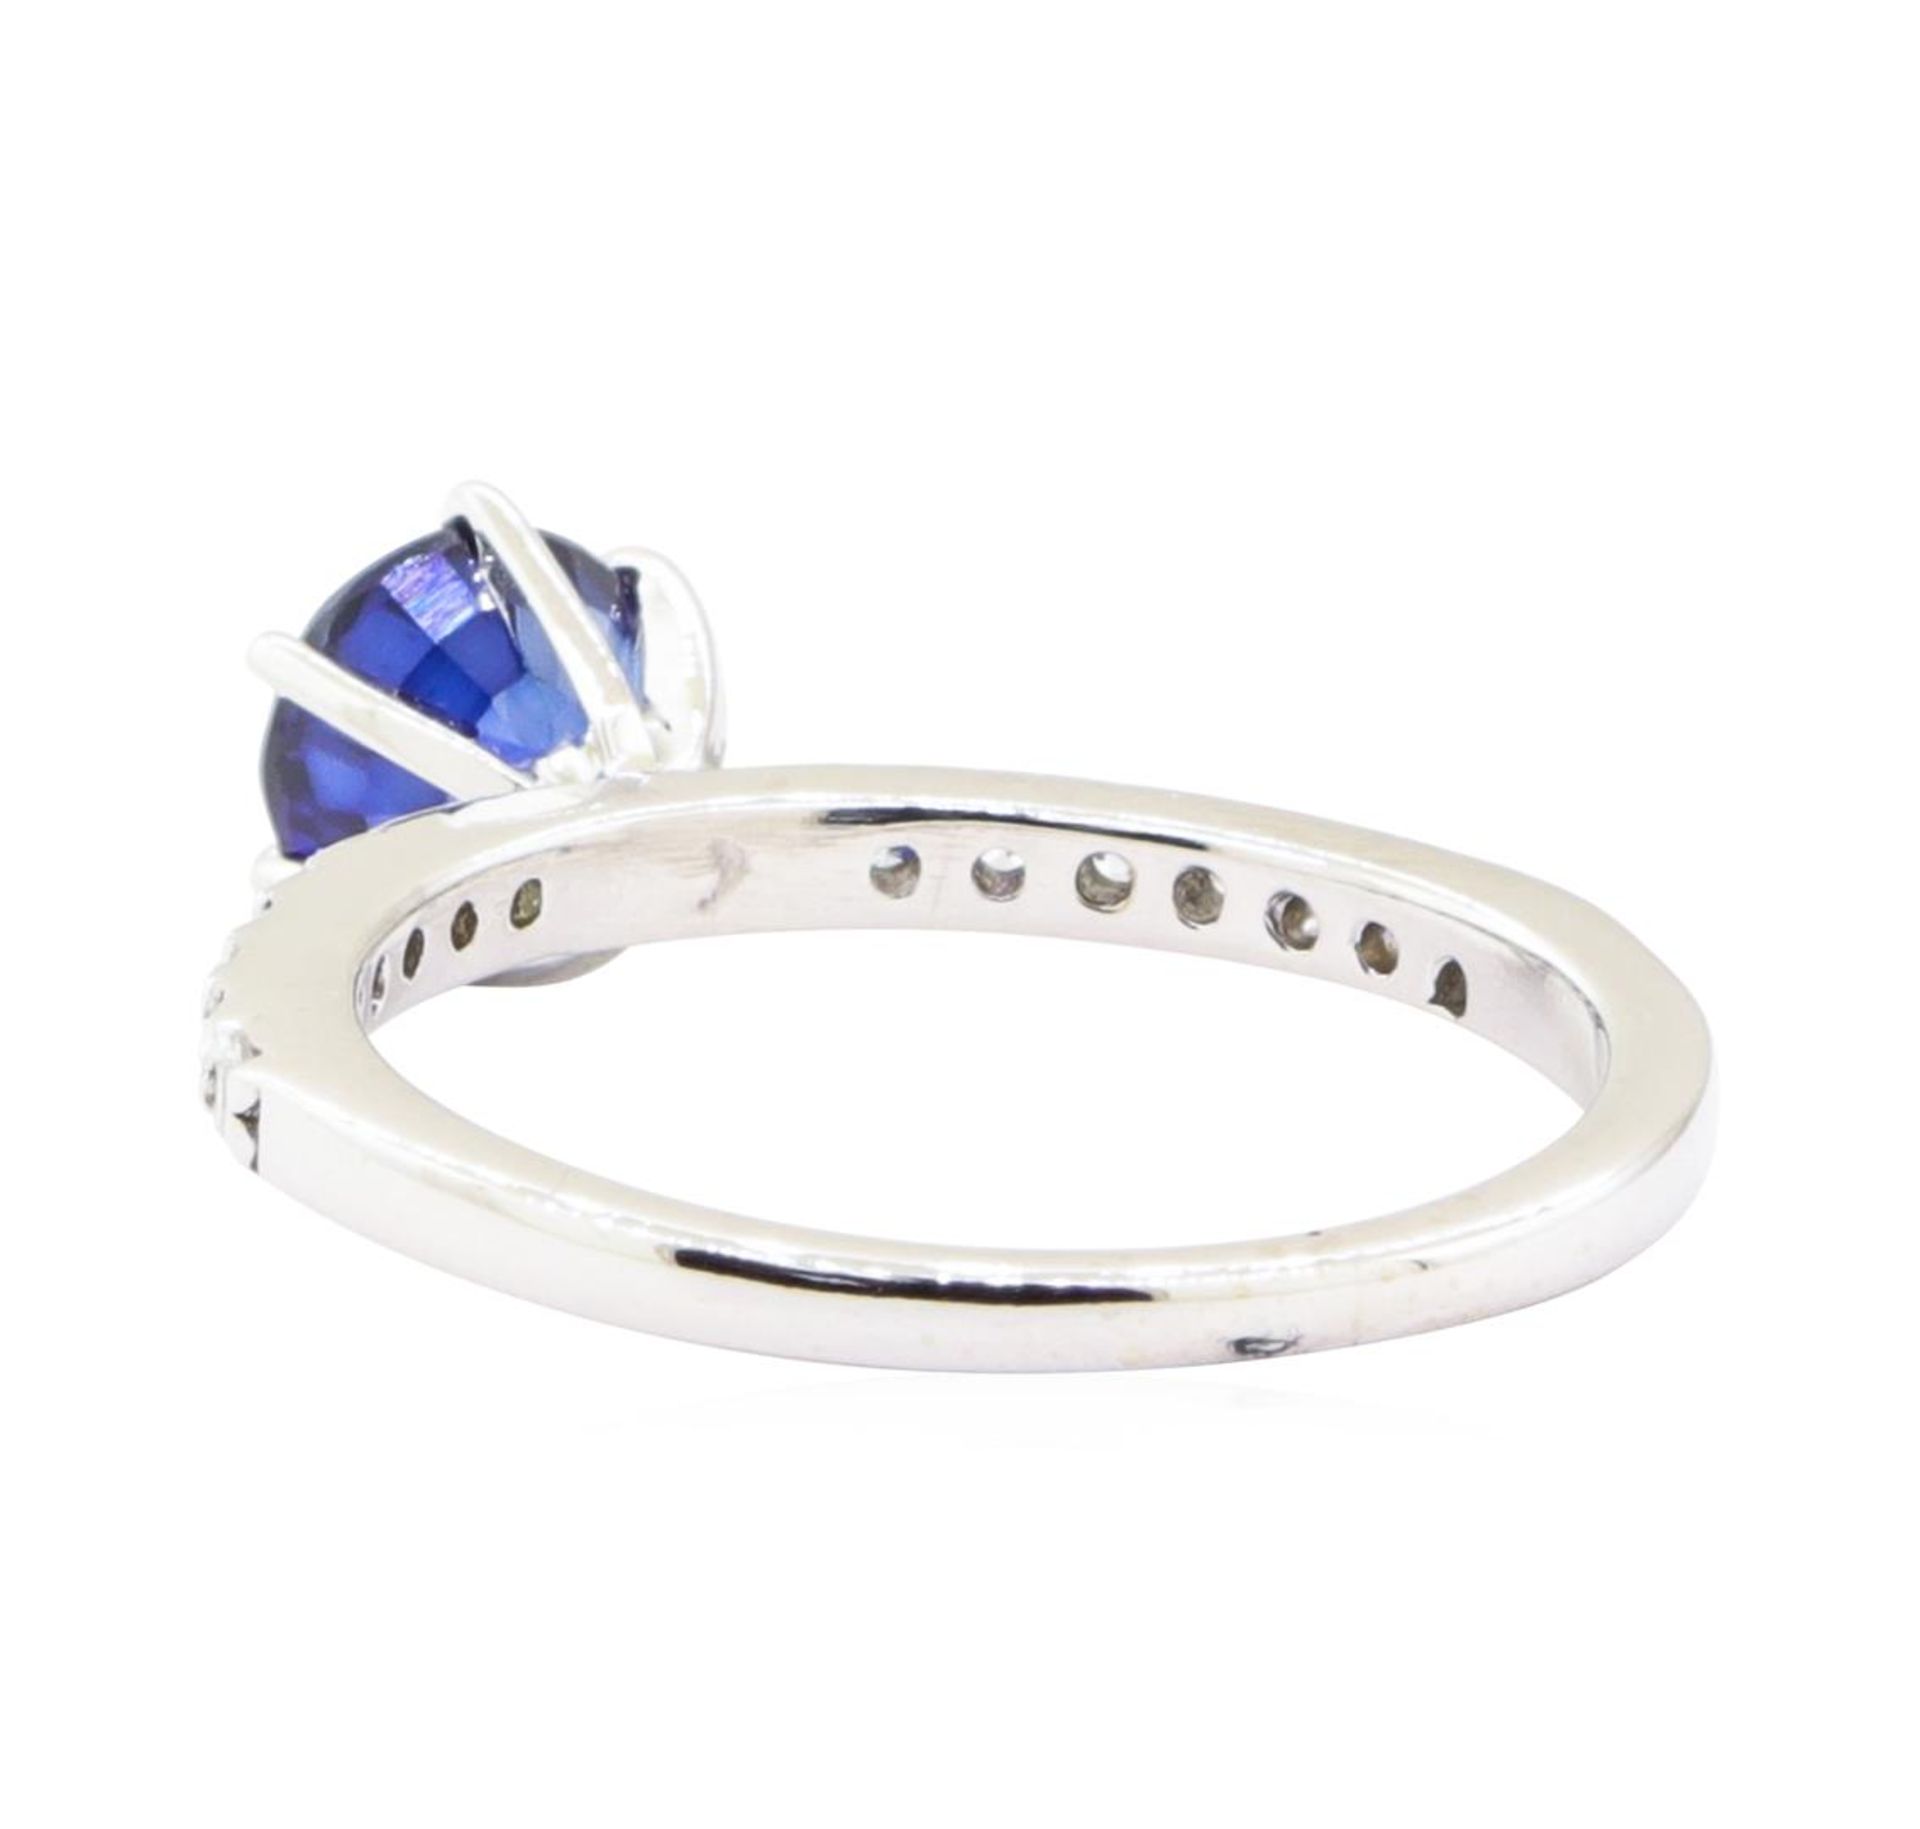 1.40 ctw Sapphire and Diamond Ring - 14KT White Gold - Image 3 of 4